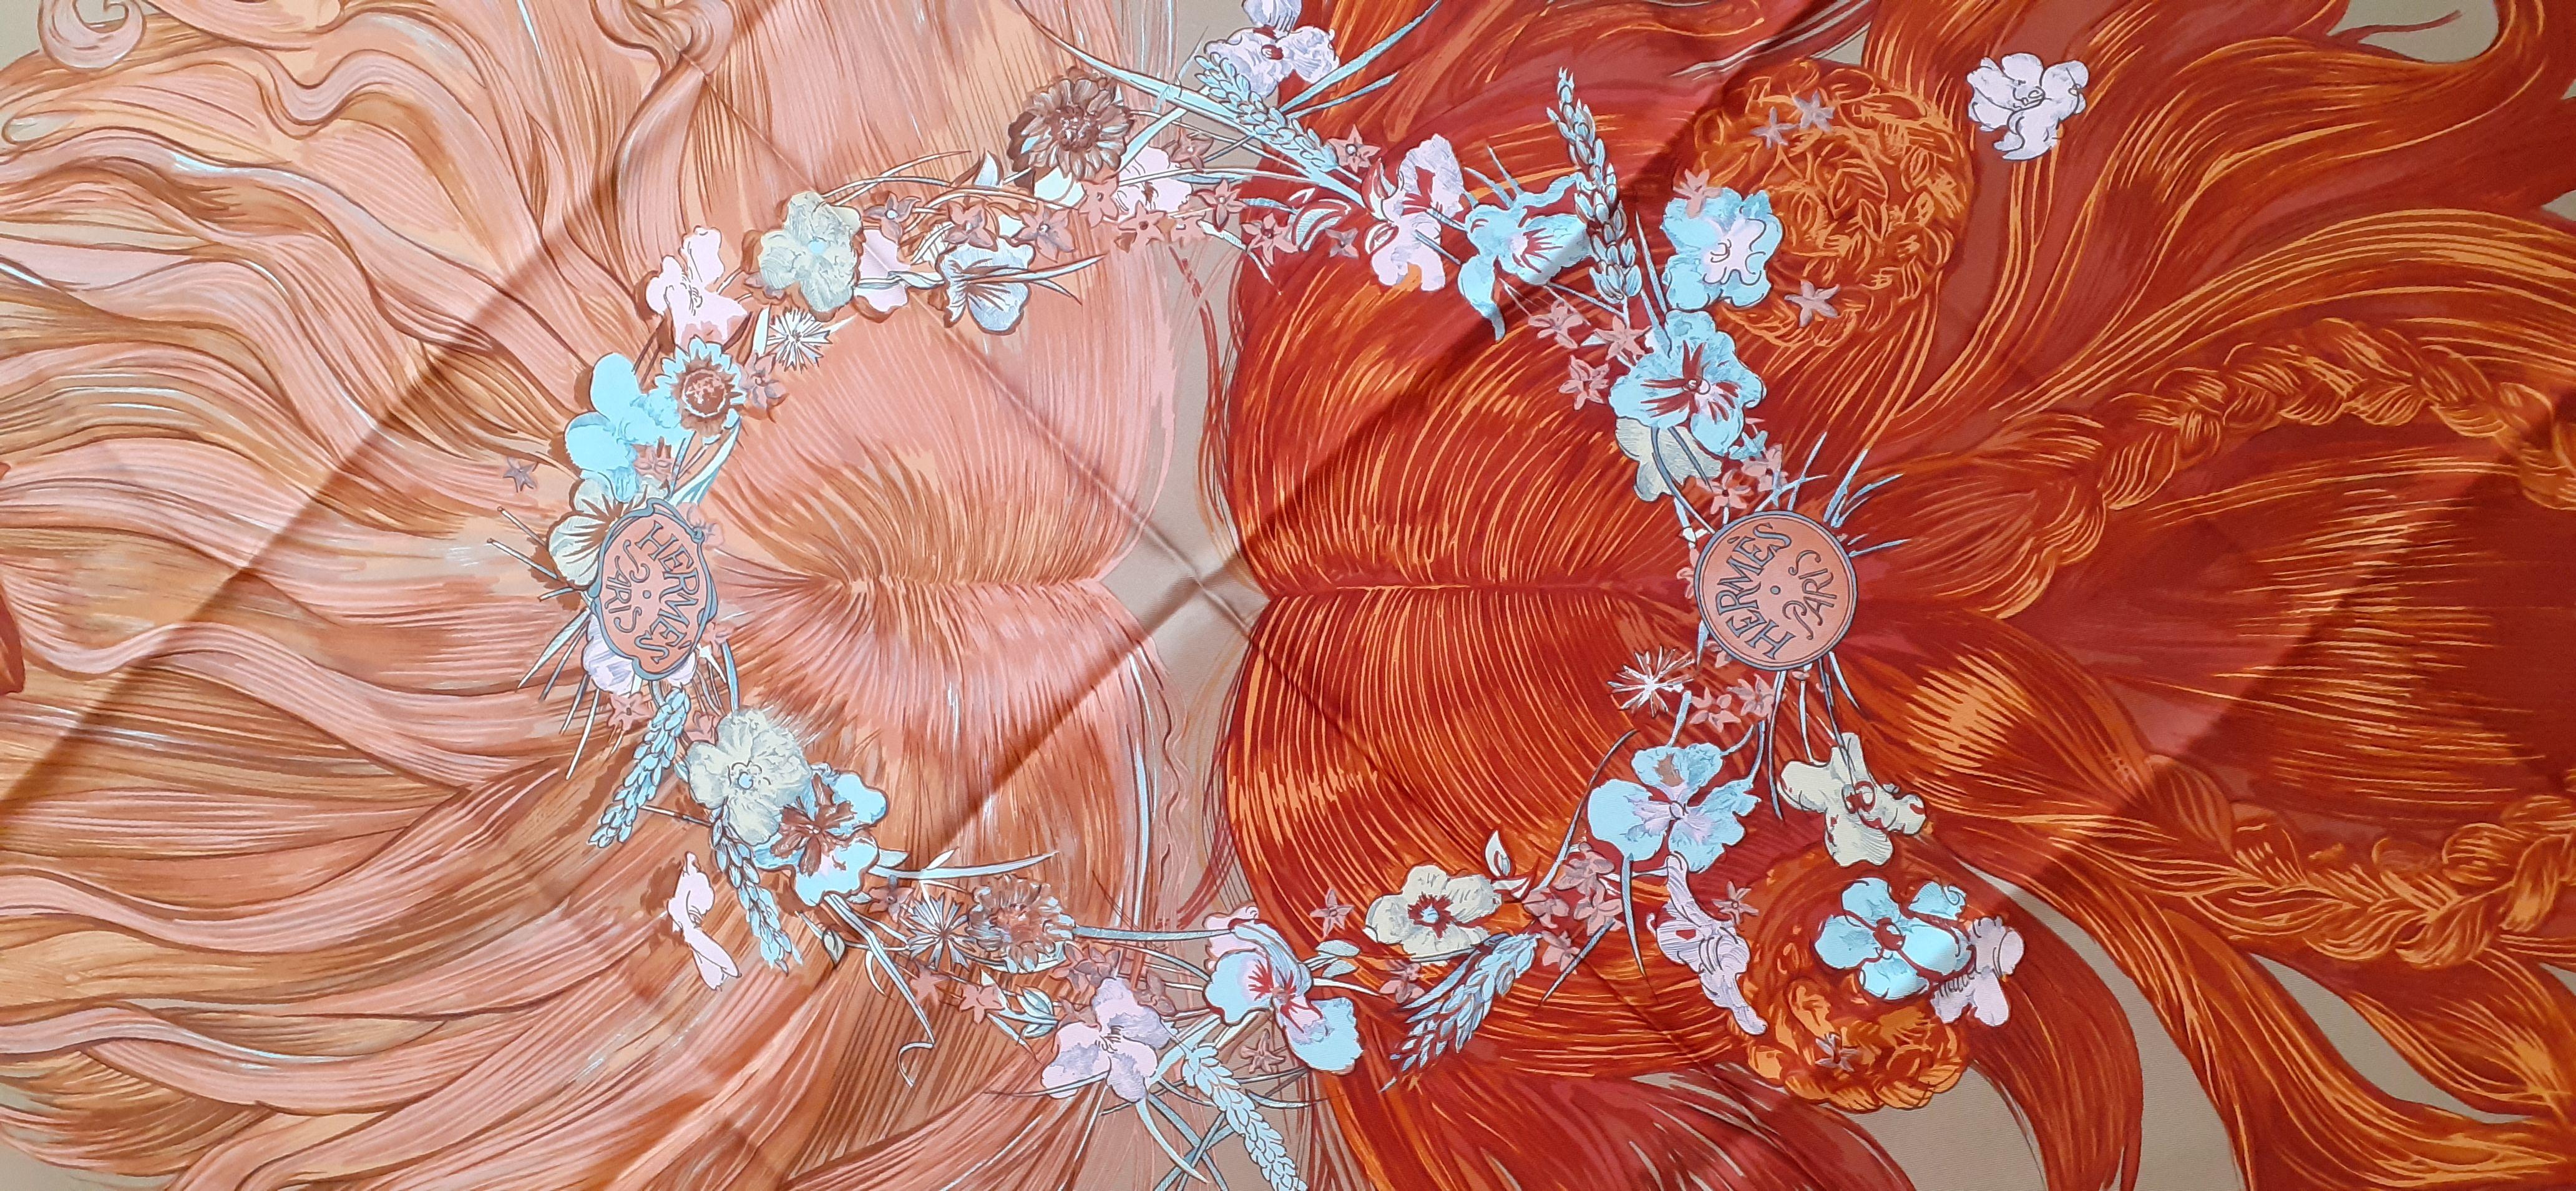 Stunning and Rare Authentic Hermès Scarf

Print: 